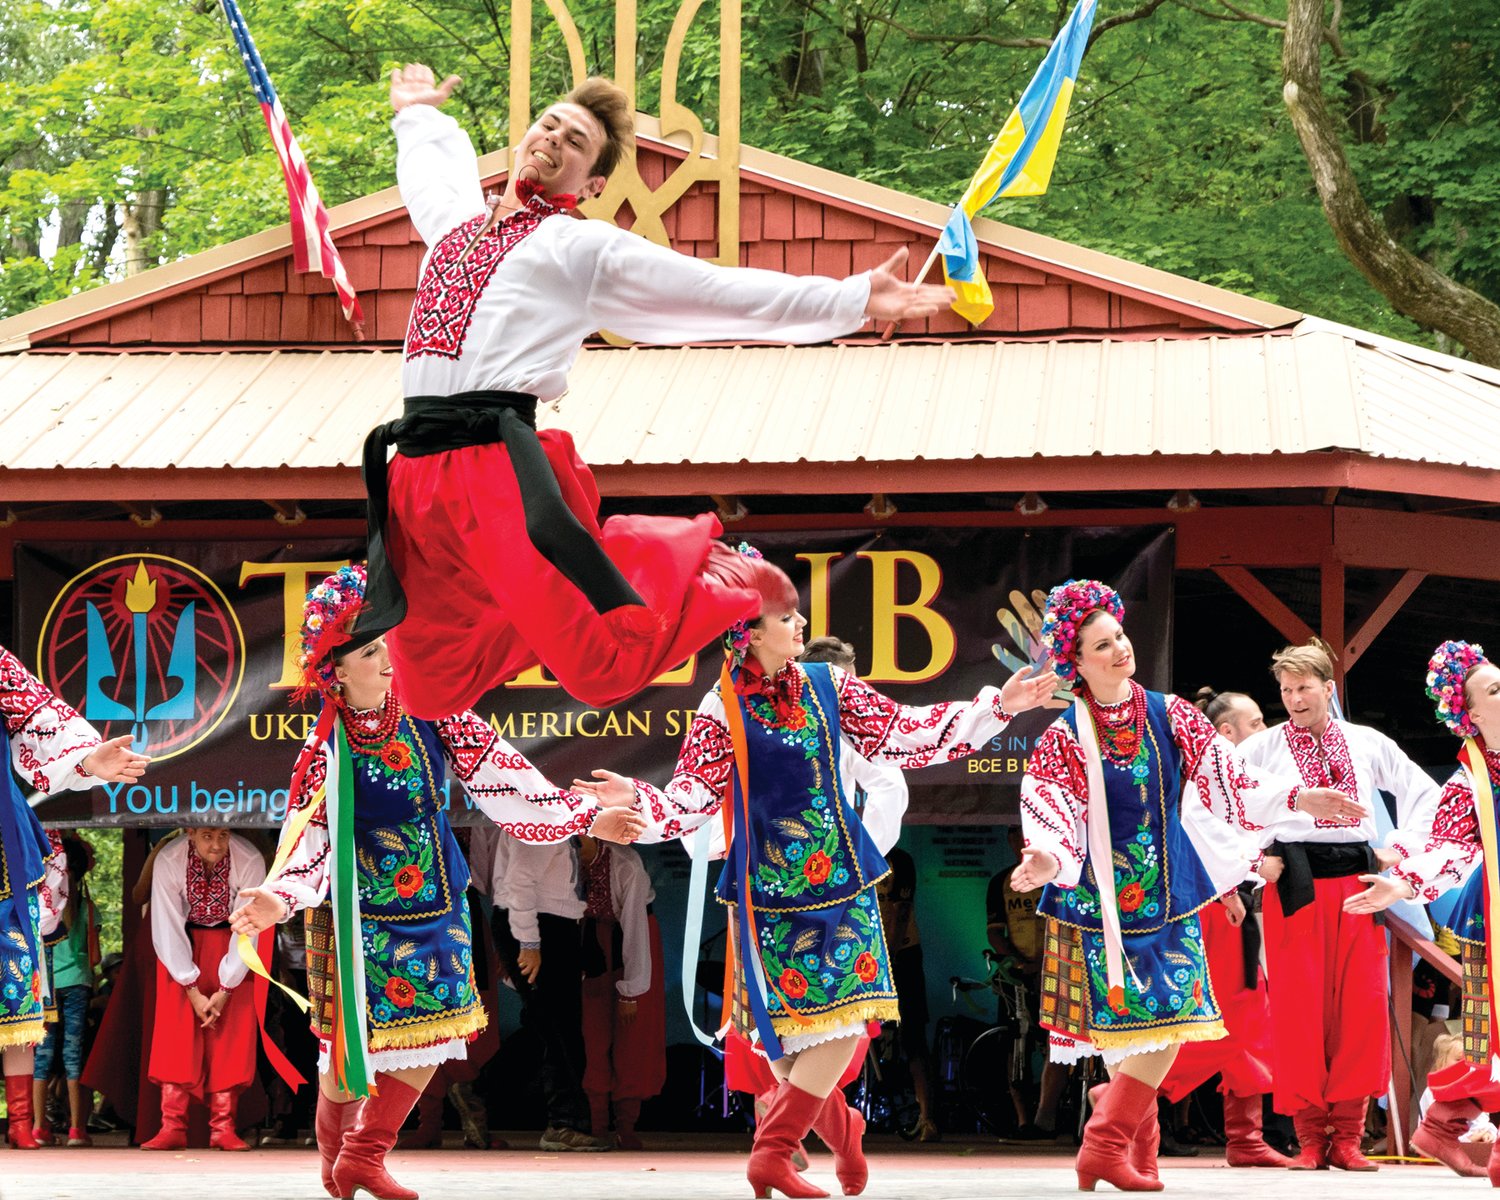 Entertainment at the Ukrainian Folk Festival includes ethnic dance and music.